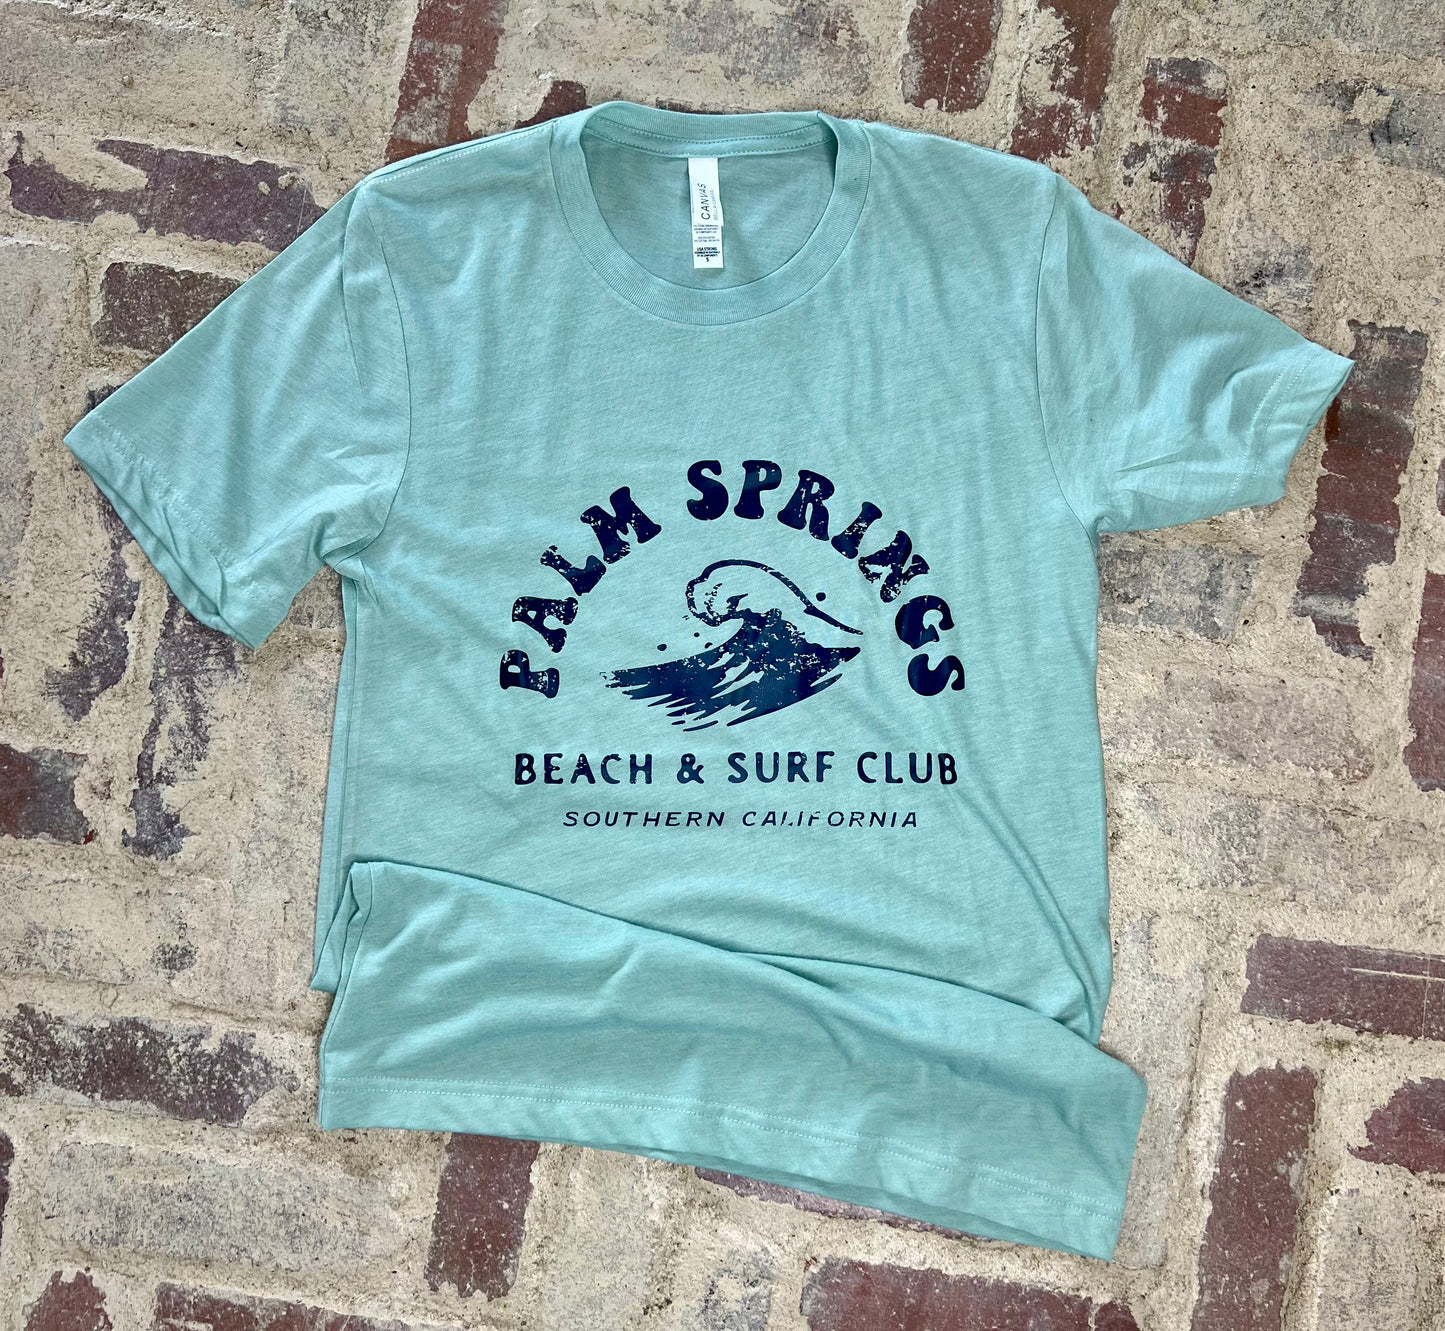 Palm Springs Graphic Tee